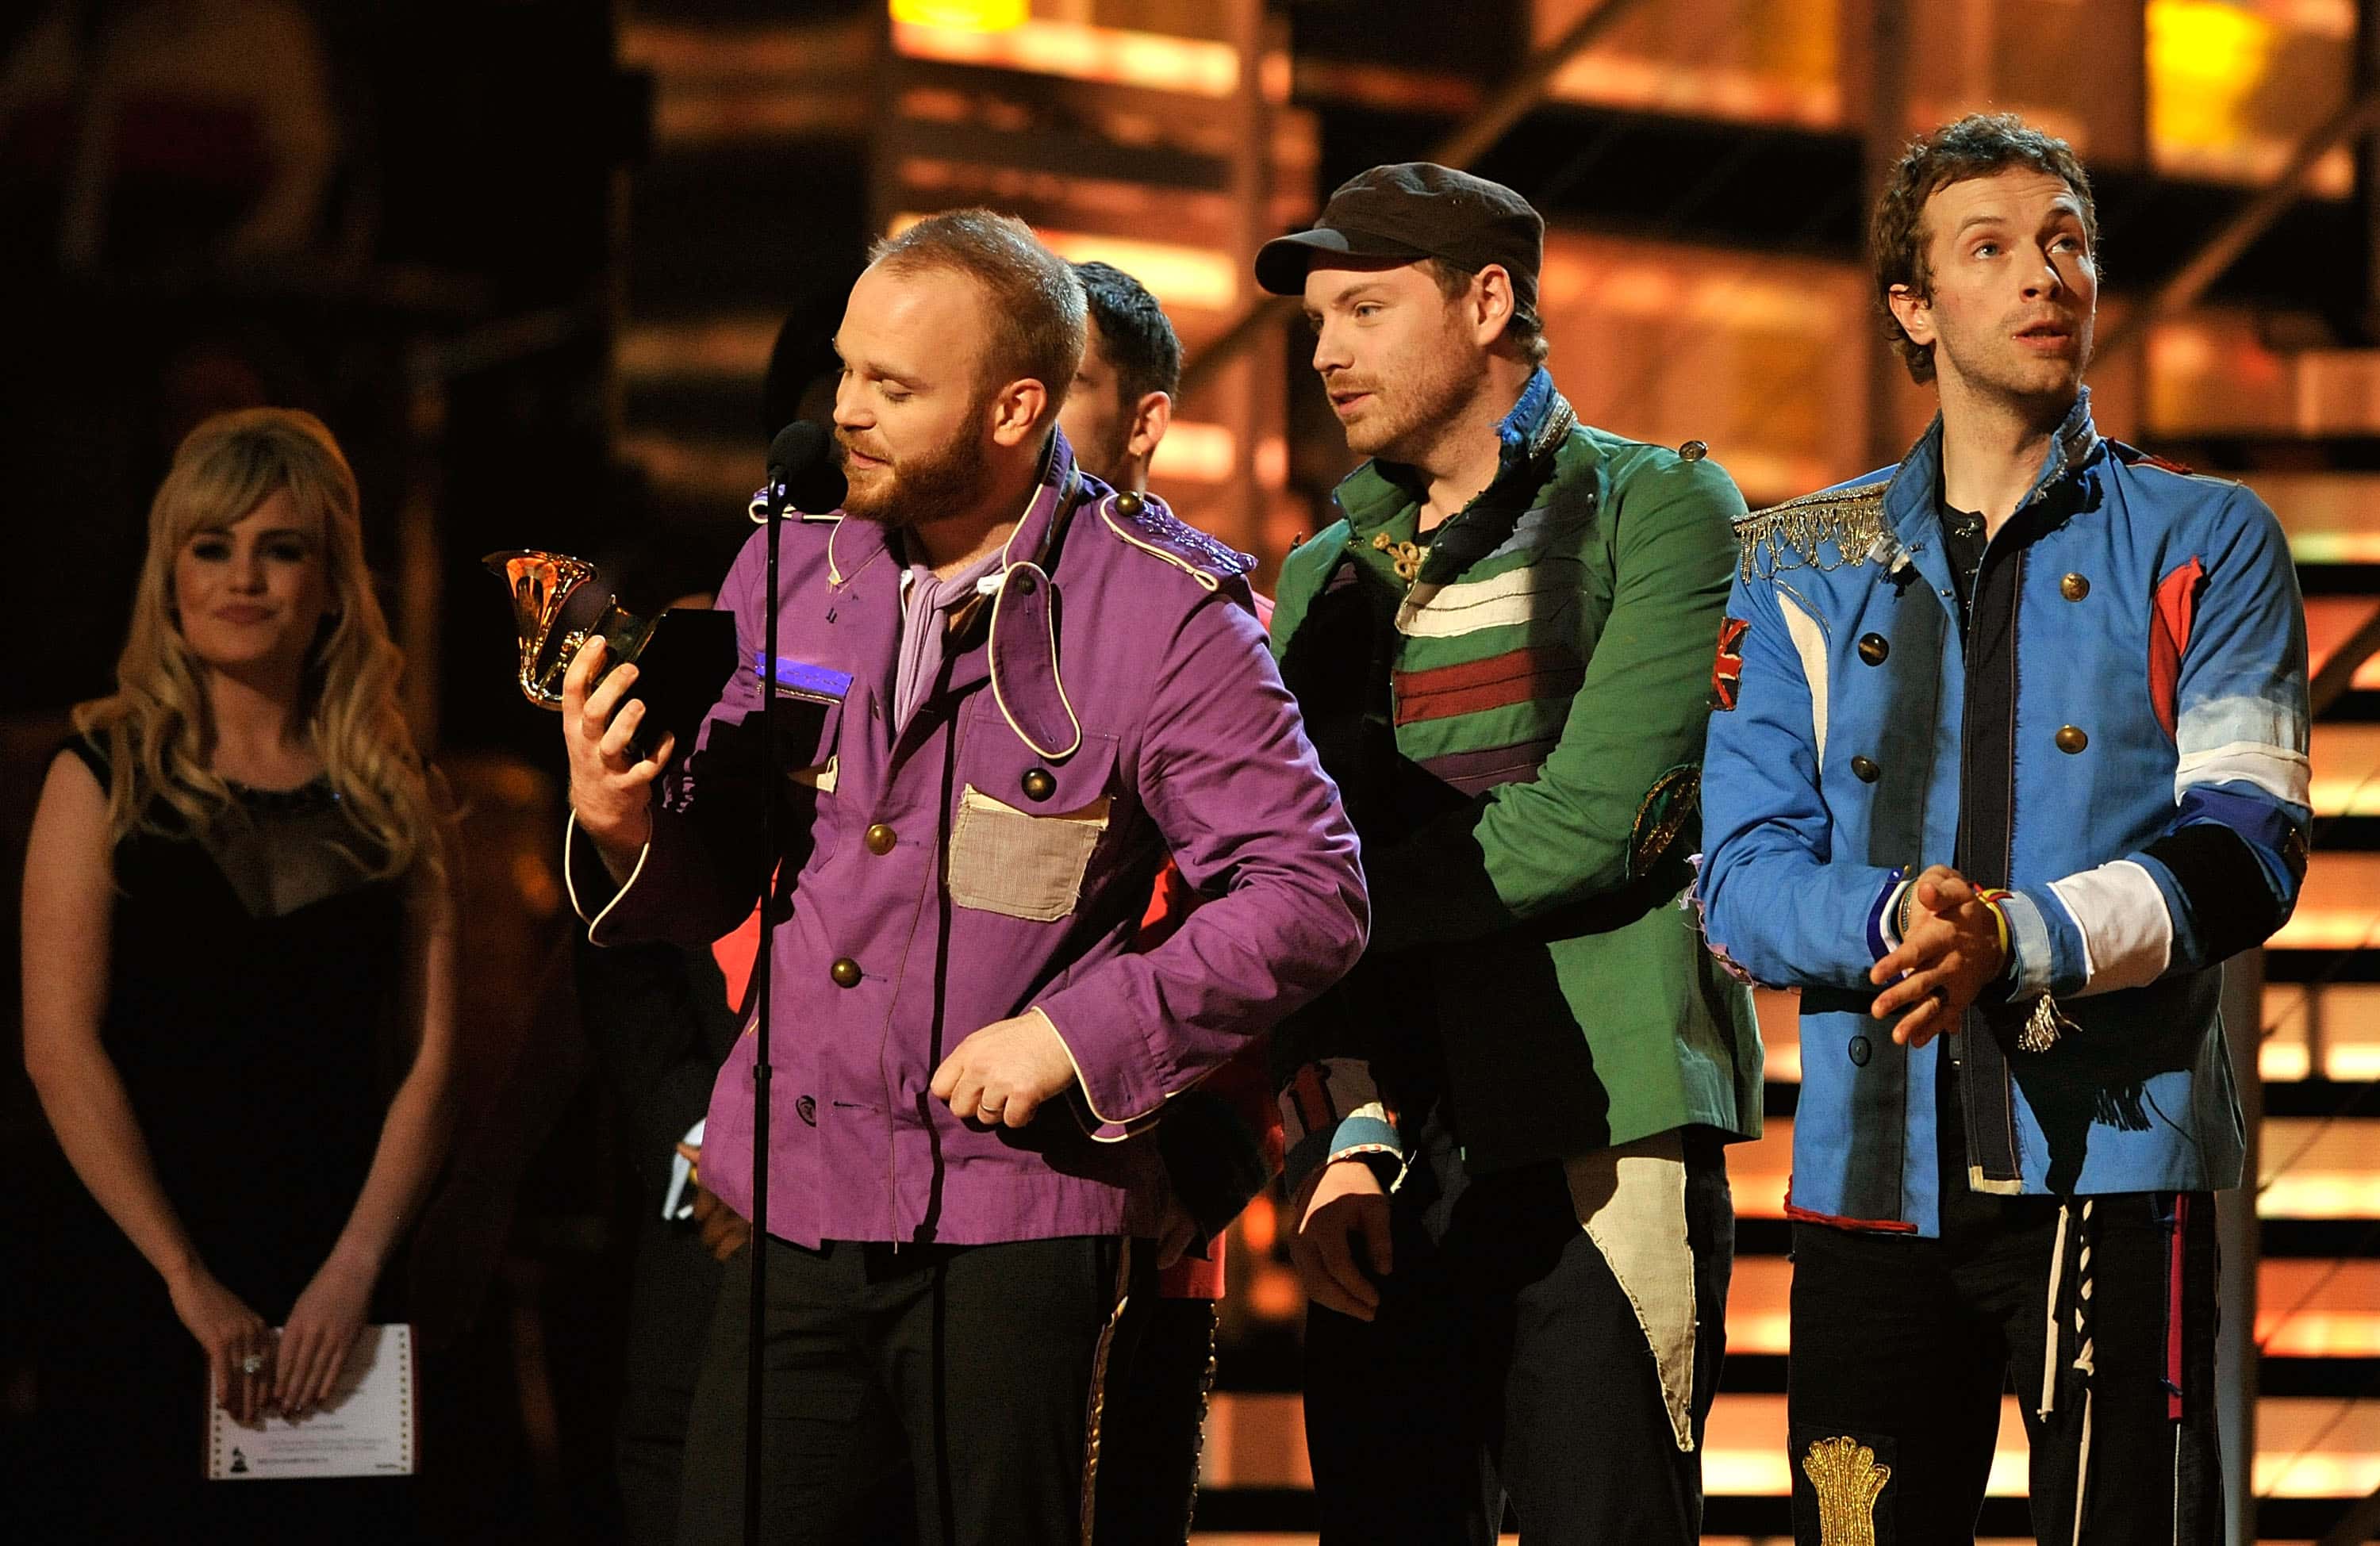 20 things you didn't know about Coldplay's Parachutes album - Radio X